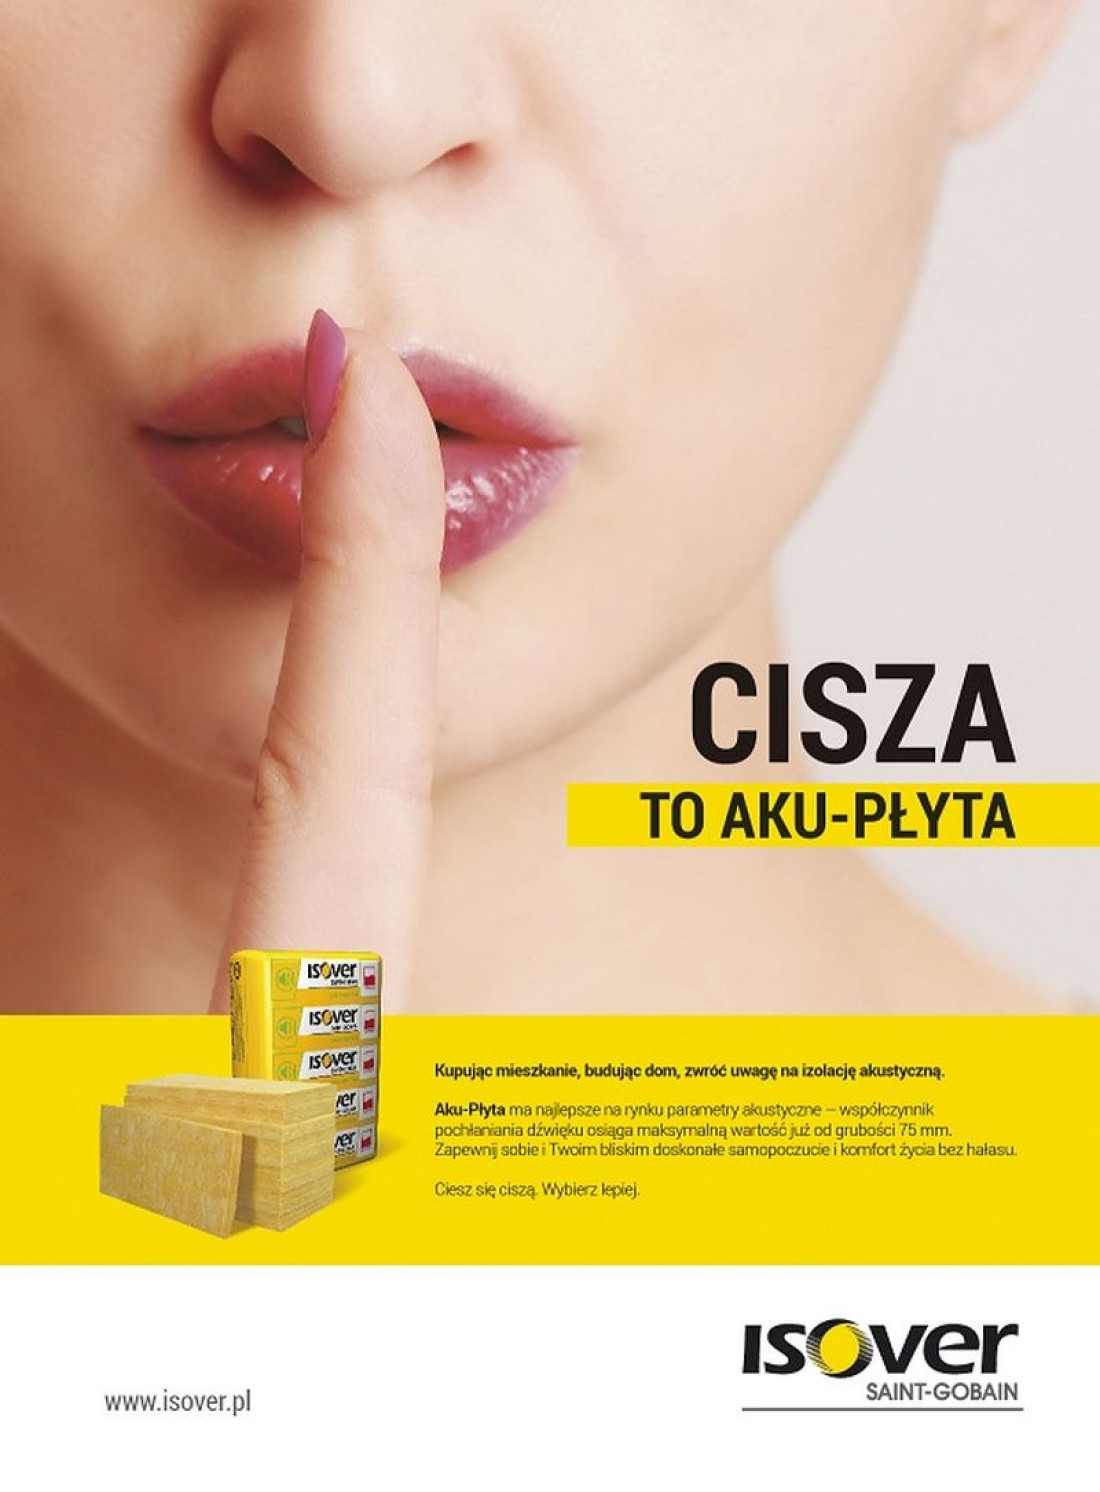 Cisza to ISOVER!